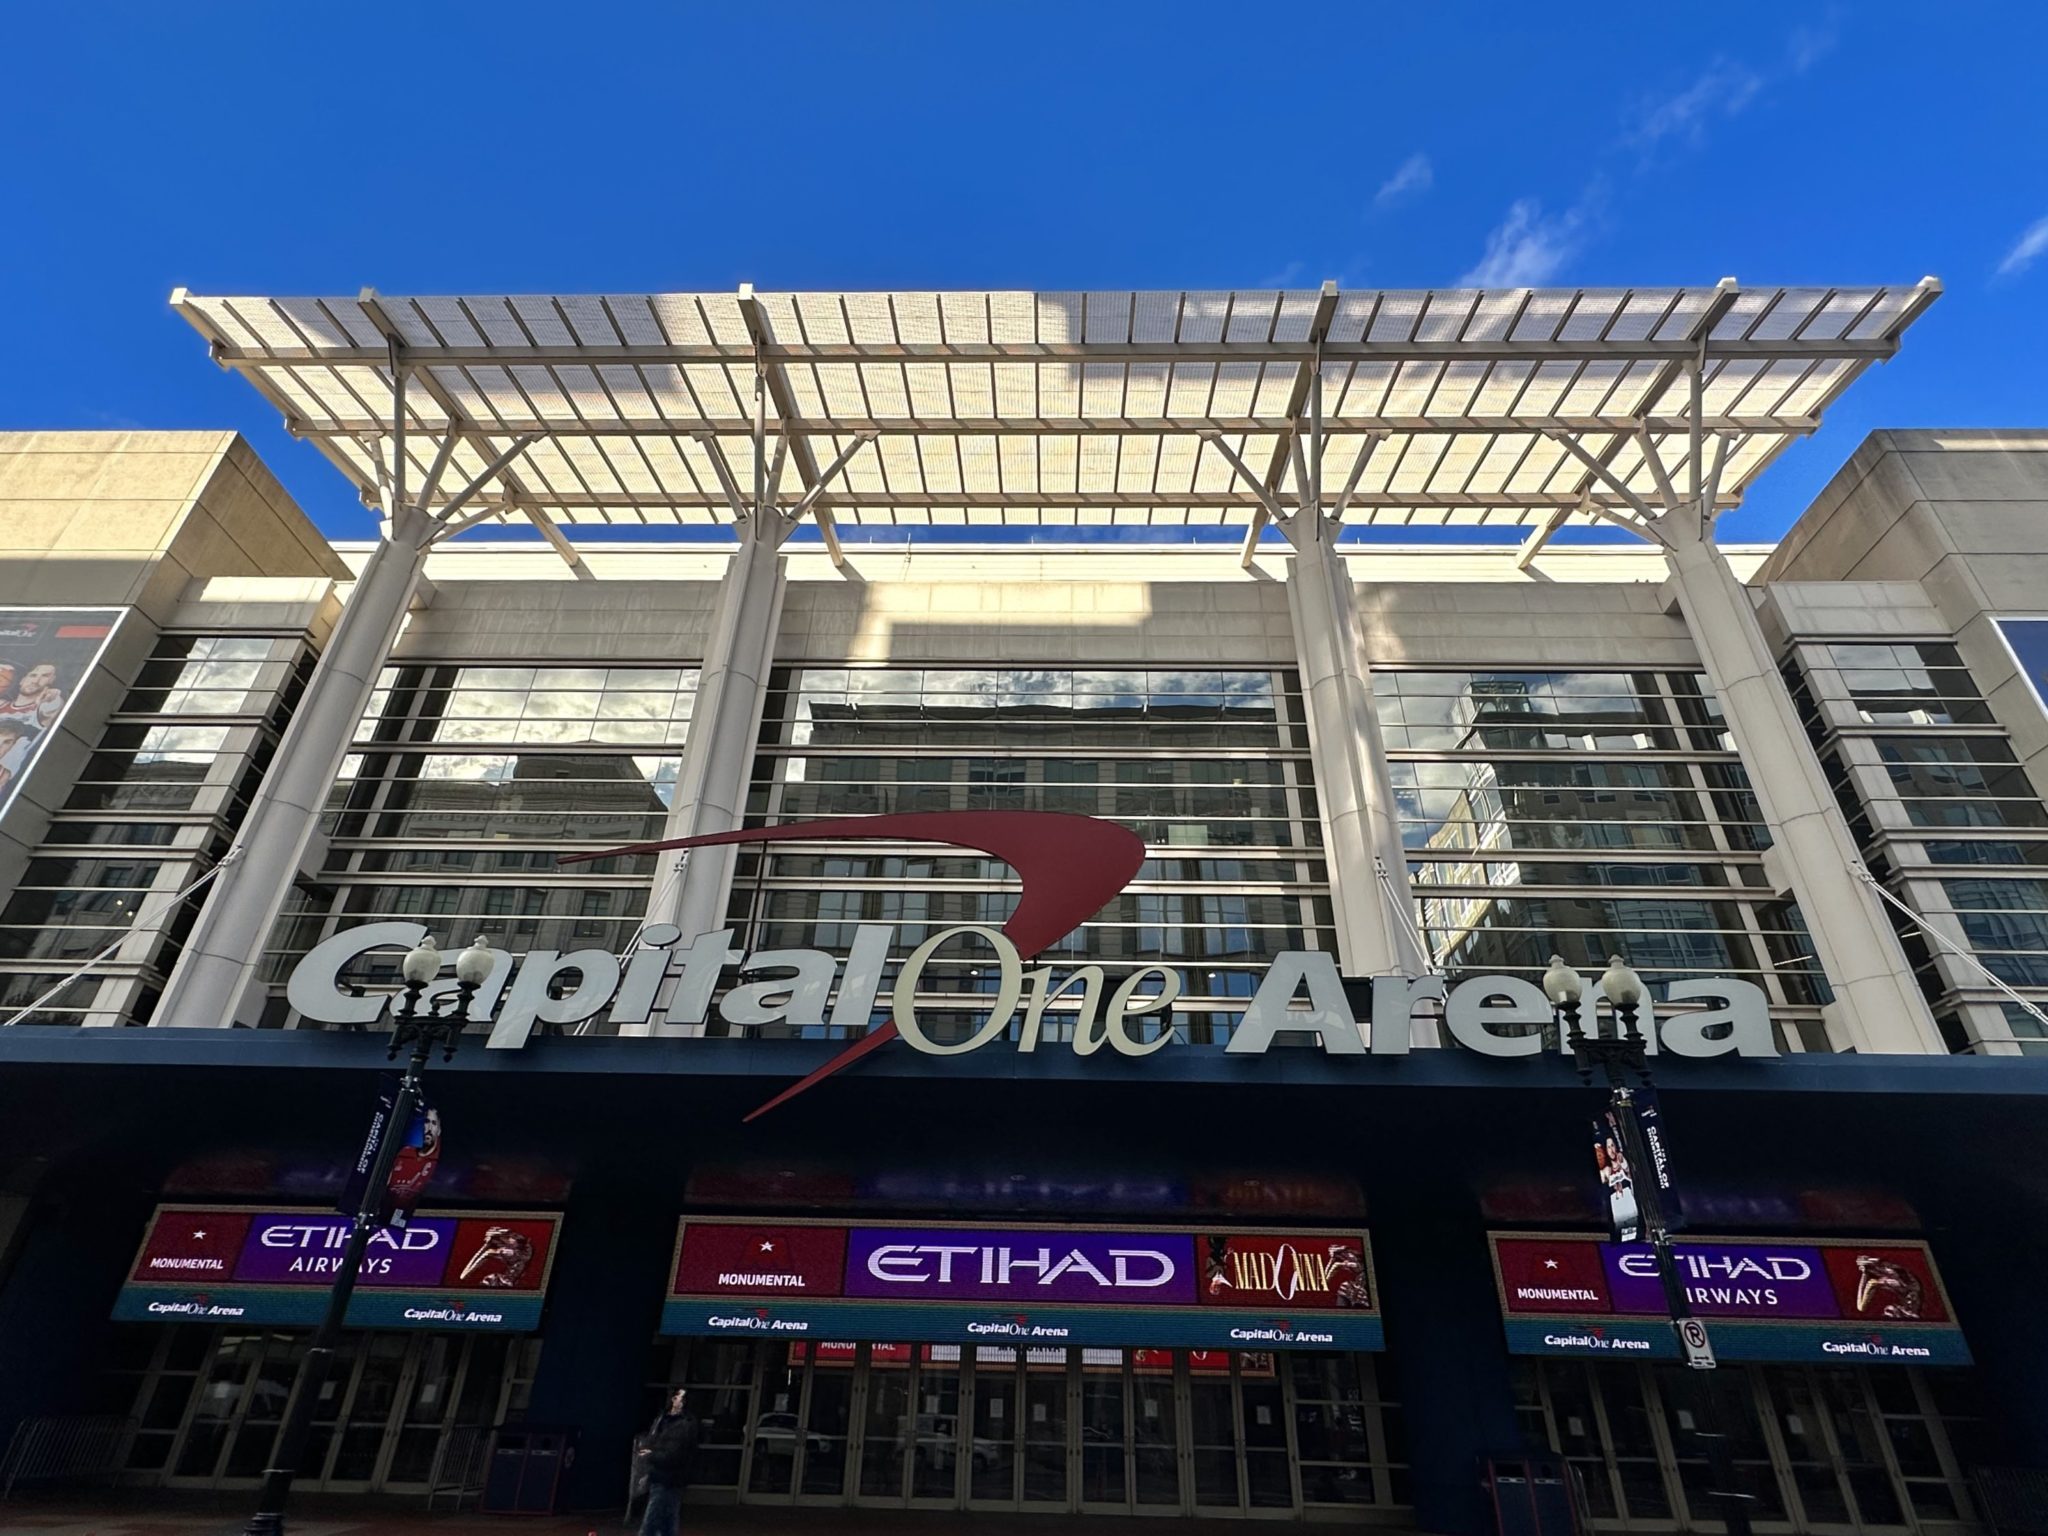 Gallery Place/ Capital One Arena